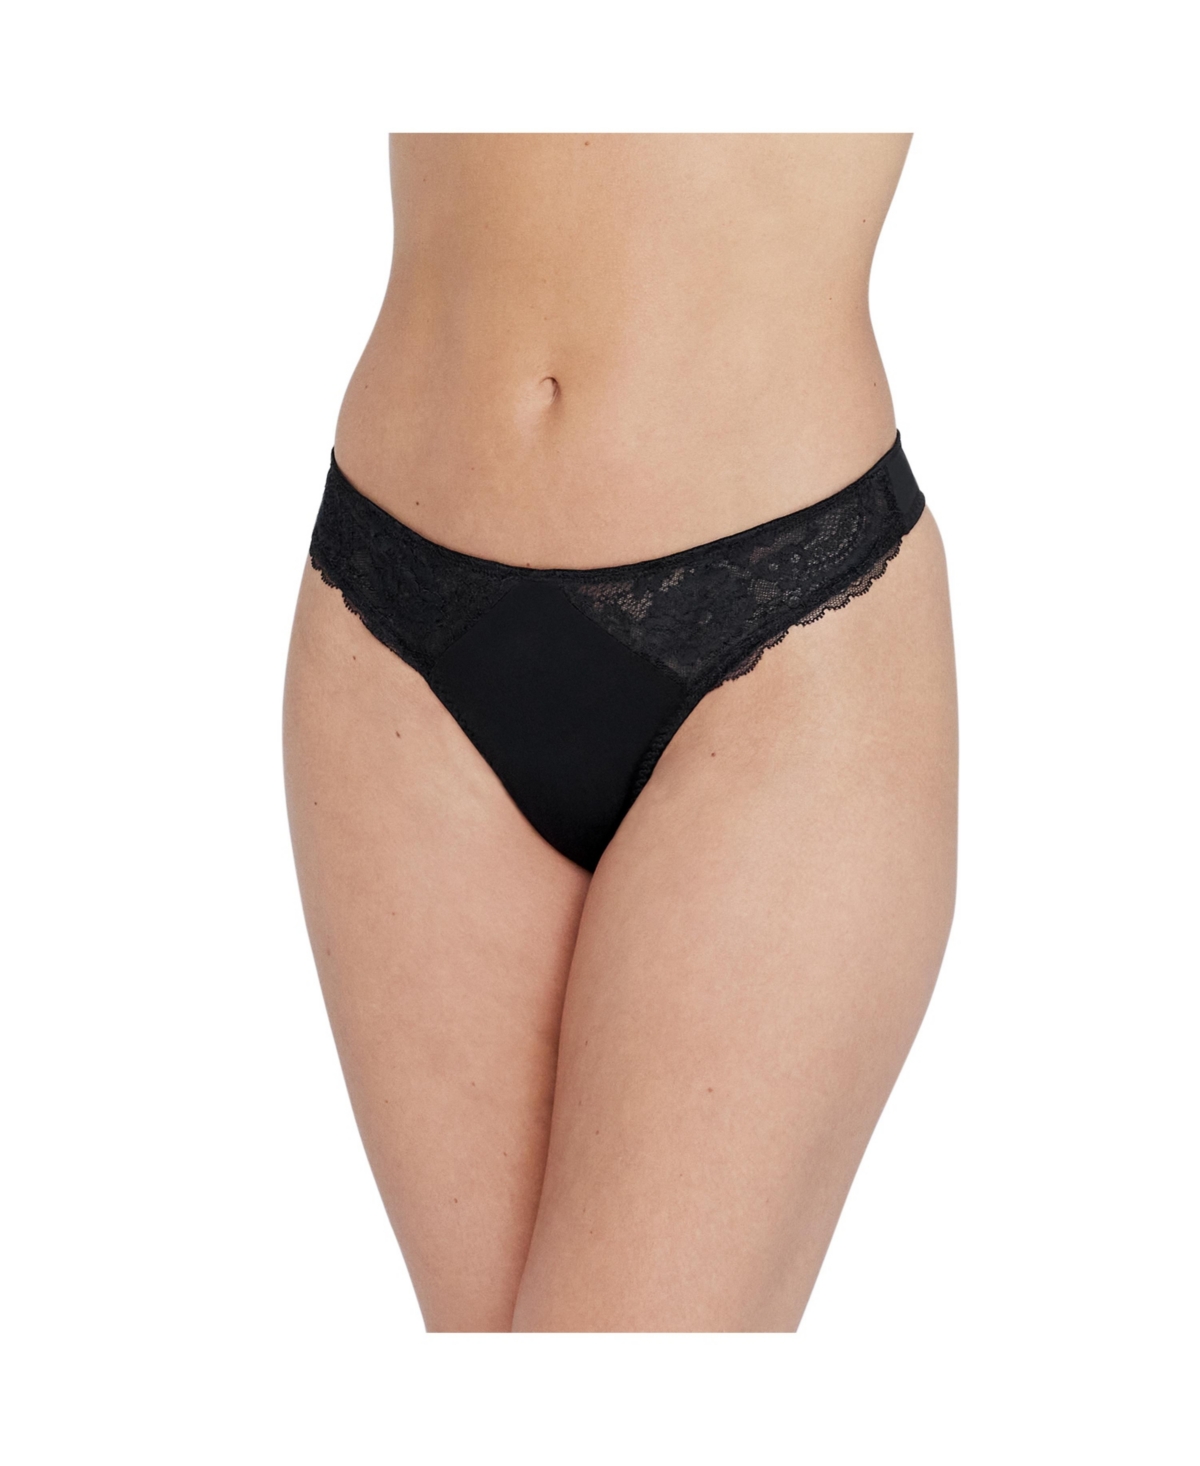 Skarlett Blue Women's Minx No-show Comfortable Lace Thong In Black